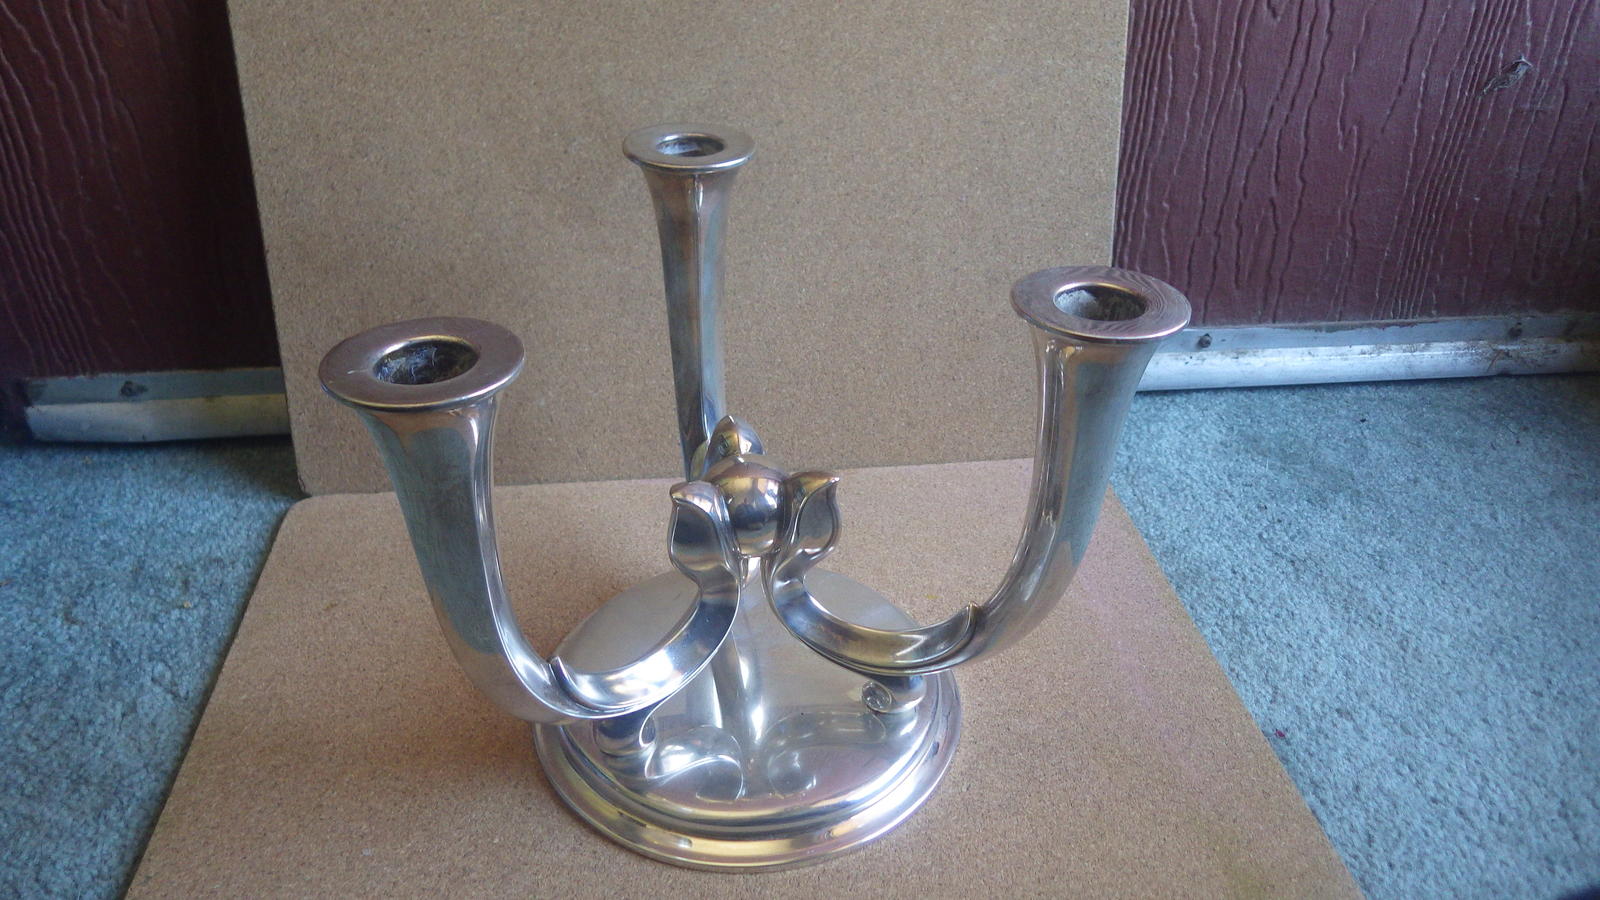 VINTAGE ART DECO WMF SILVER PLATED 3 CANDLE CANDELABRA C1938 - $75.00